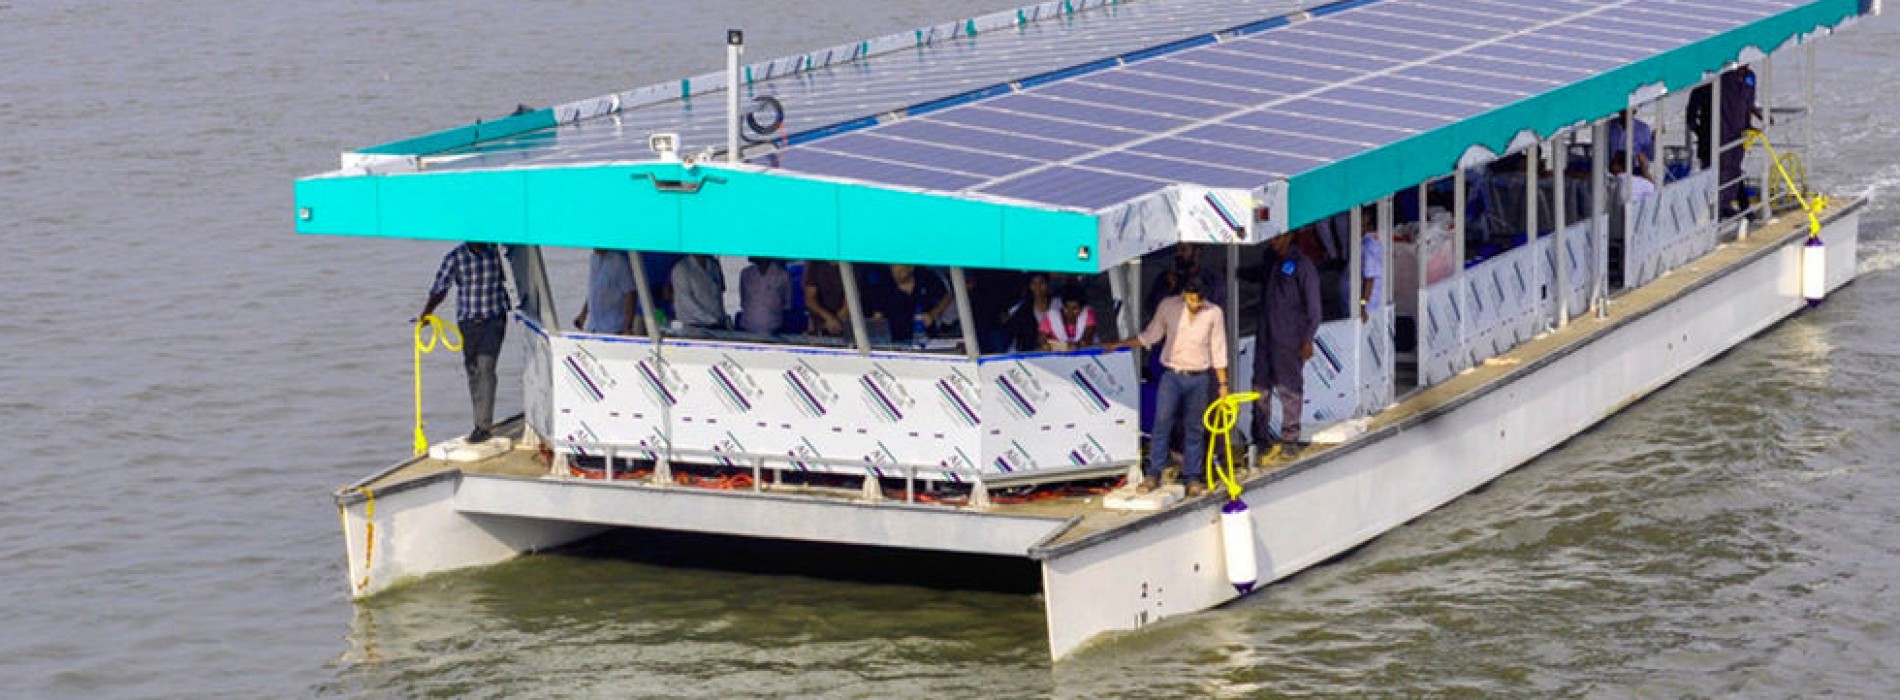 Kerala comes up with new water transport solution as Solar cruise boat